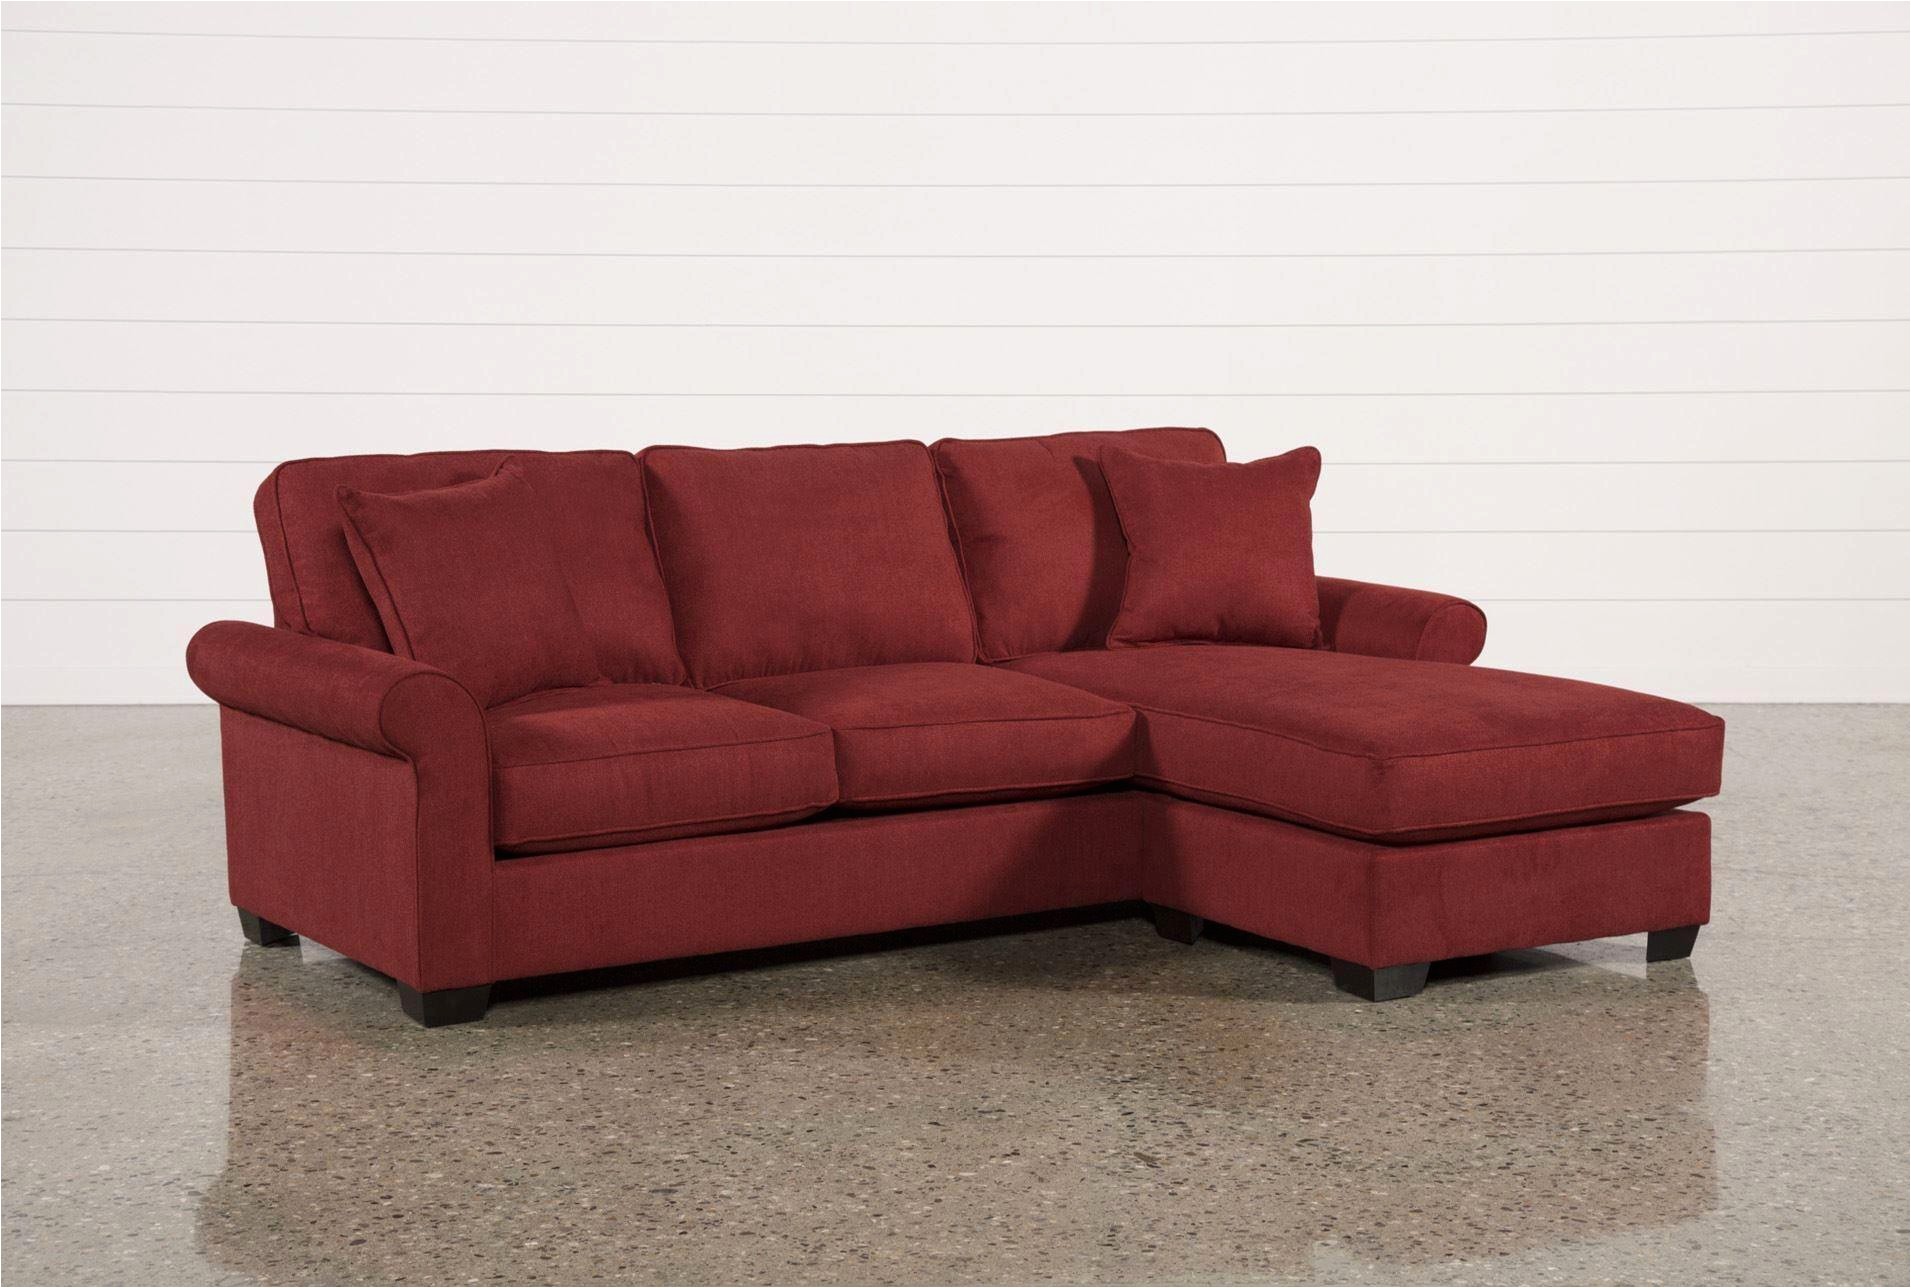 leather sofas and chair lovely furniture best leather loveseats leather loveseats 0d furnitures